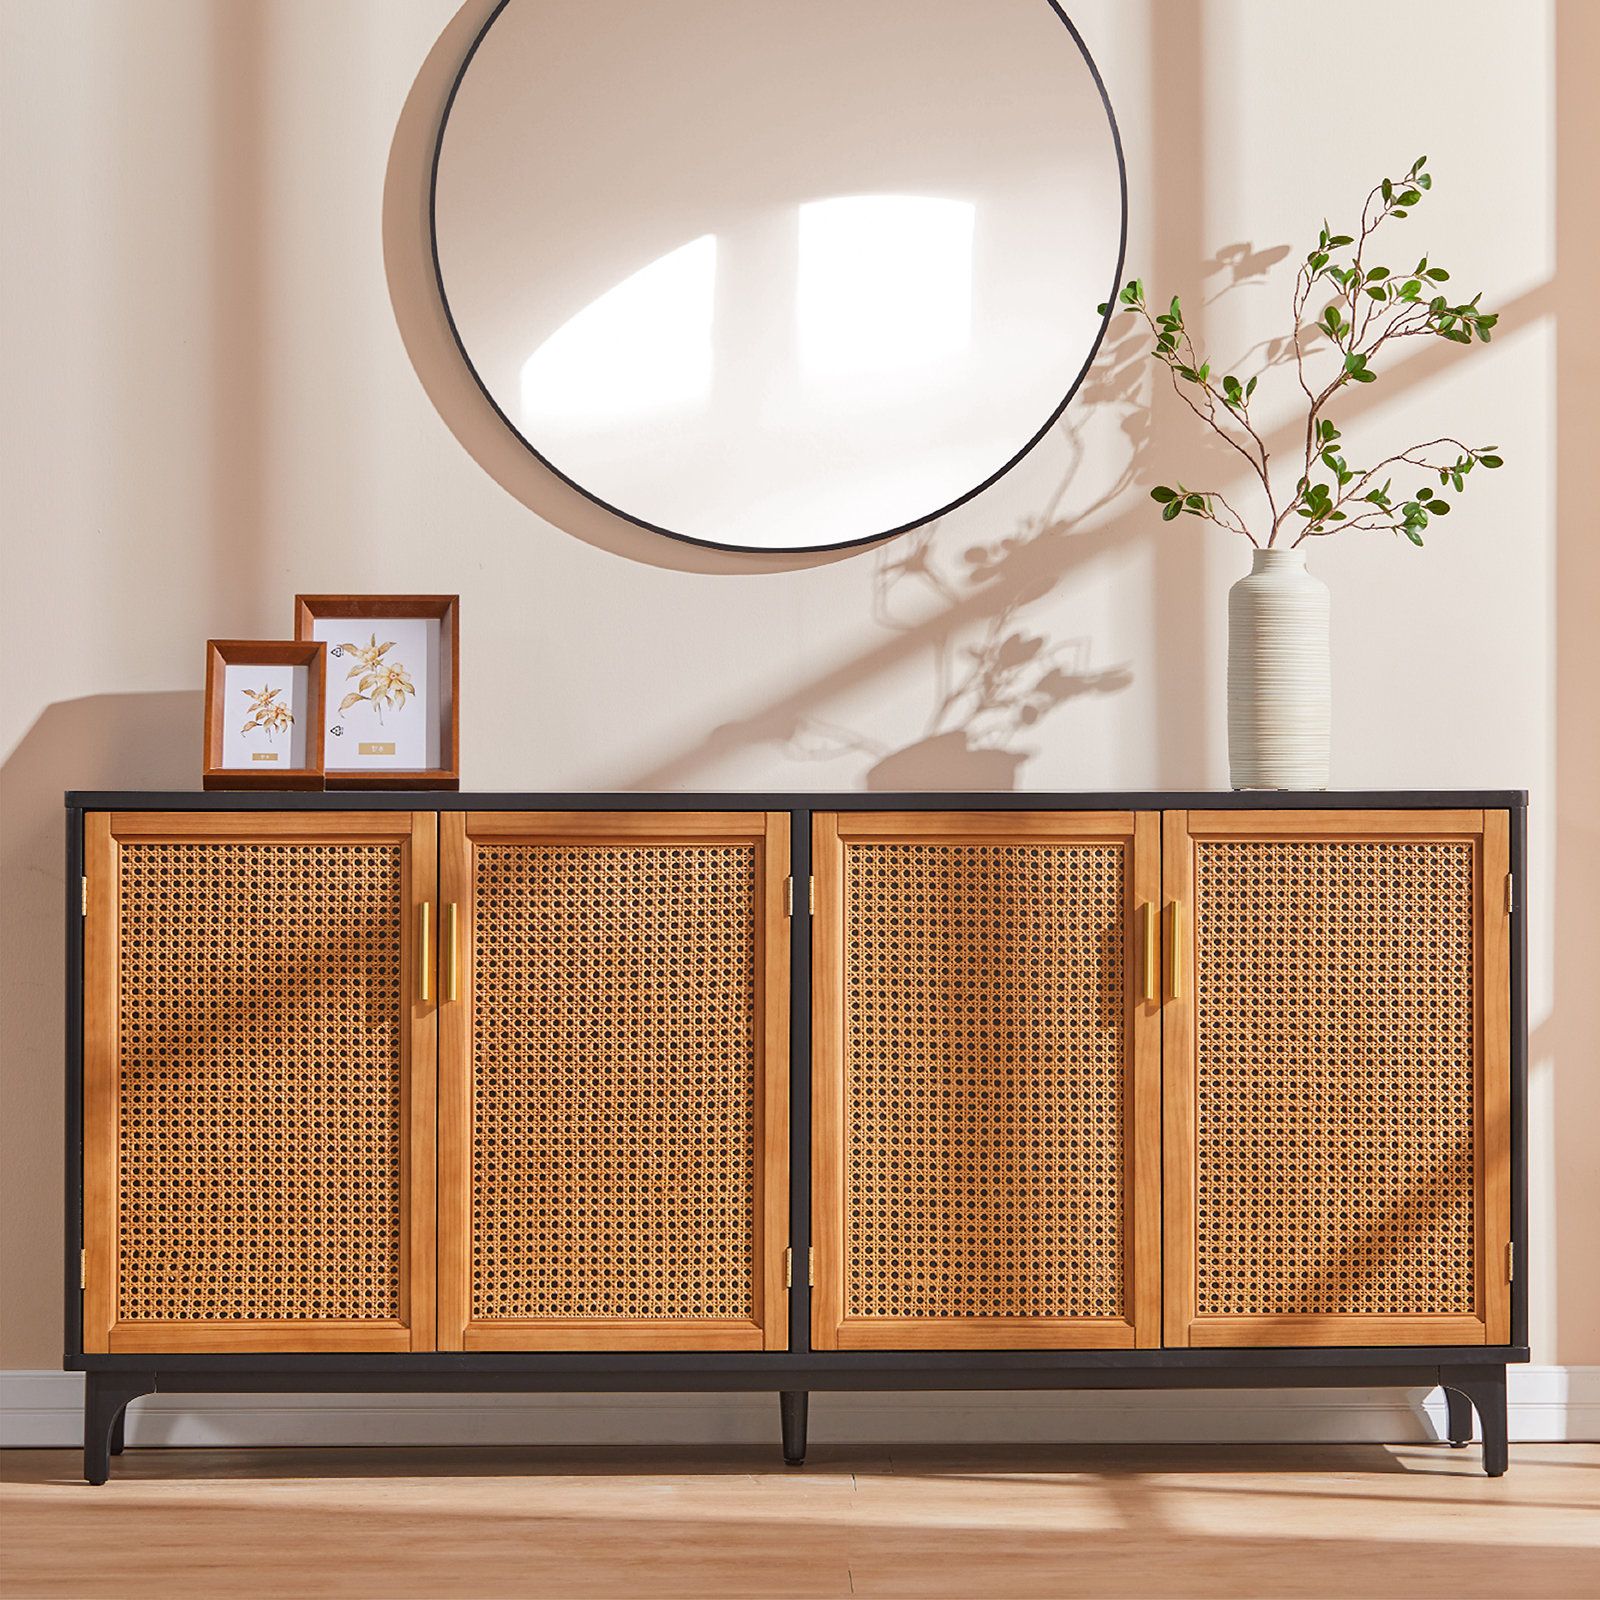 Bay Isle Home Hiawatha Sideboard Buffet Cabinet With Woven Rattan Doors And  Adjustable Shelf & Reviews | Wayfair Throughout Sideboard Buffet Cabinets (View 10 of 20)